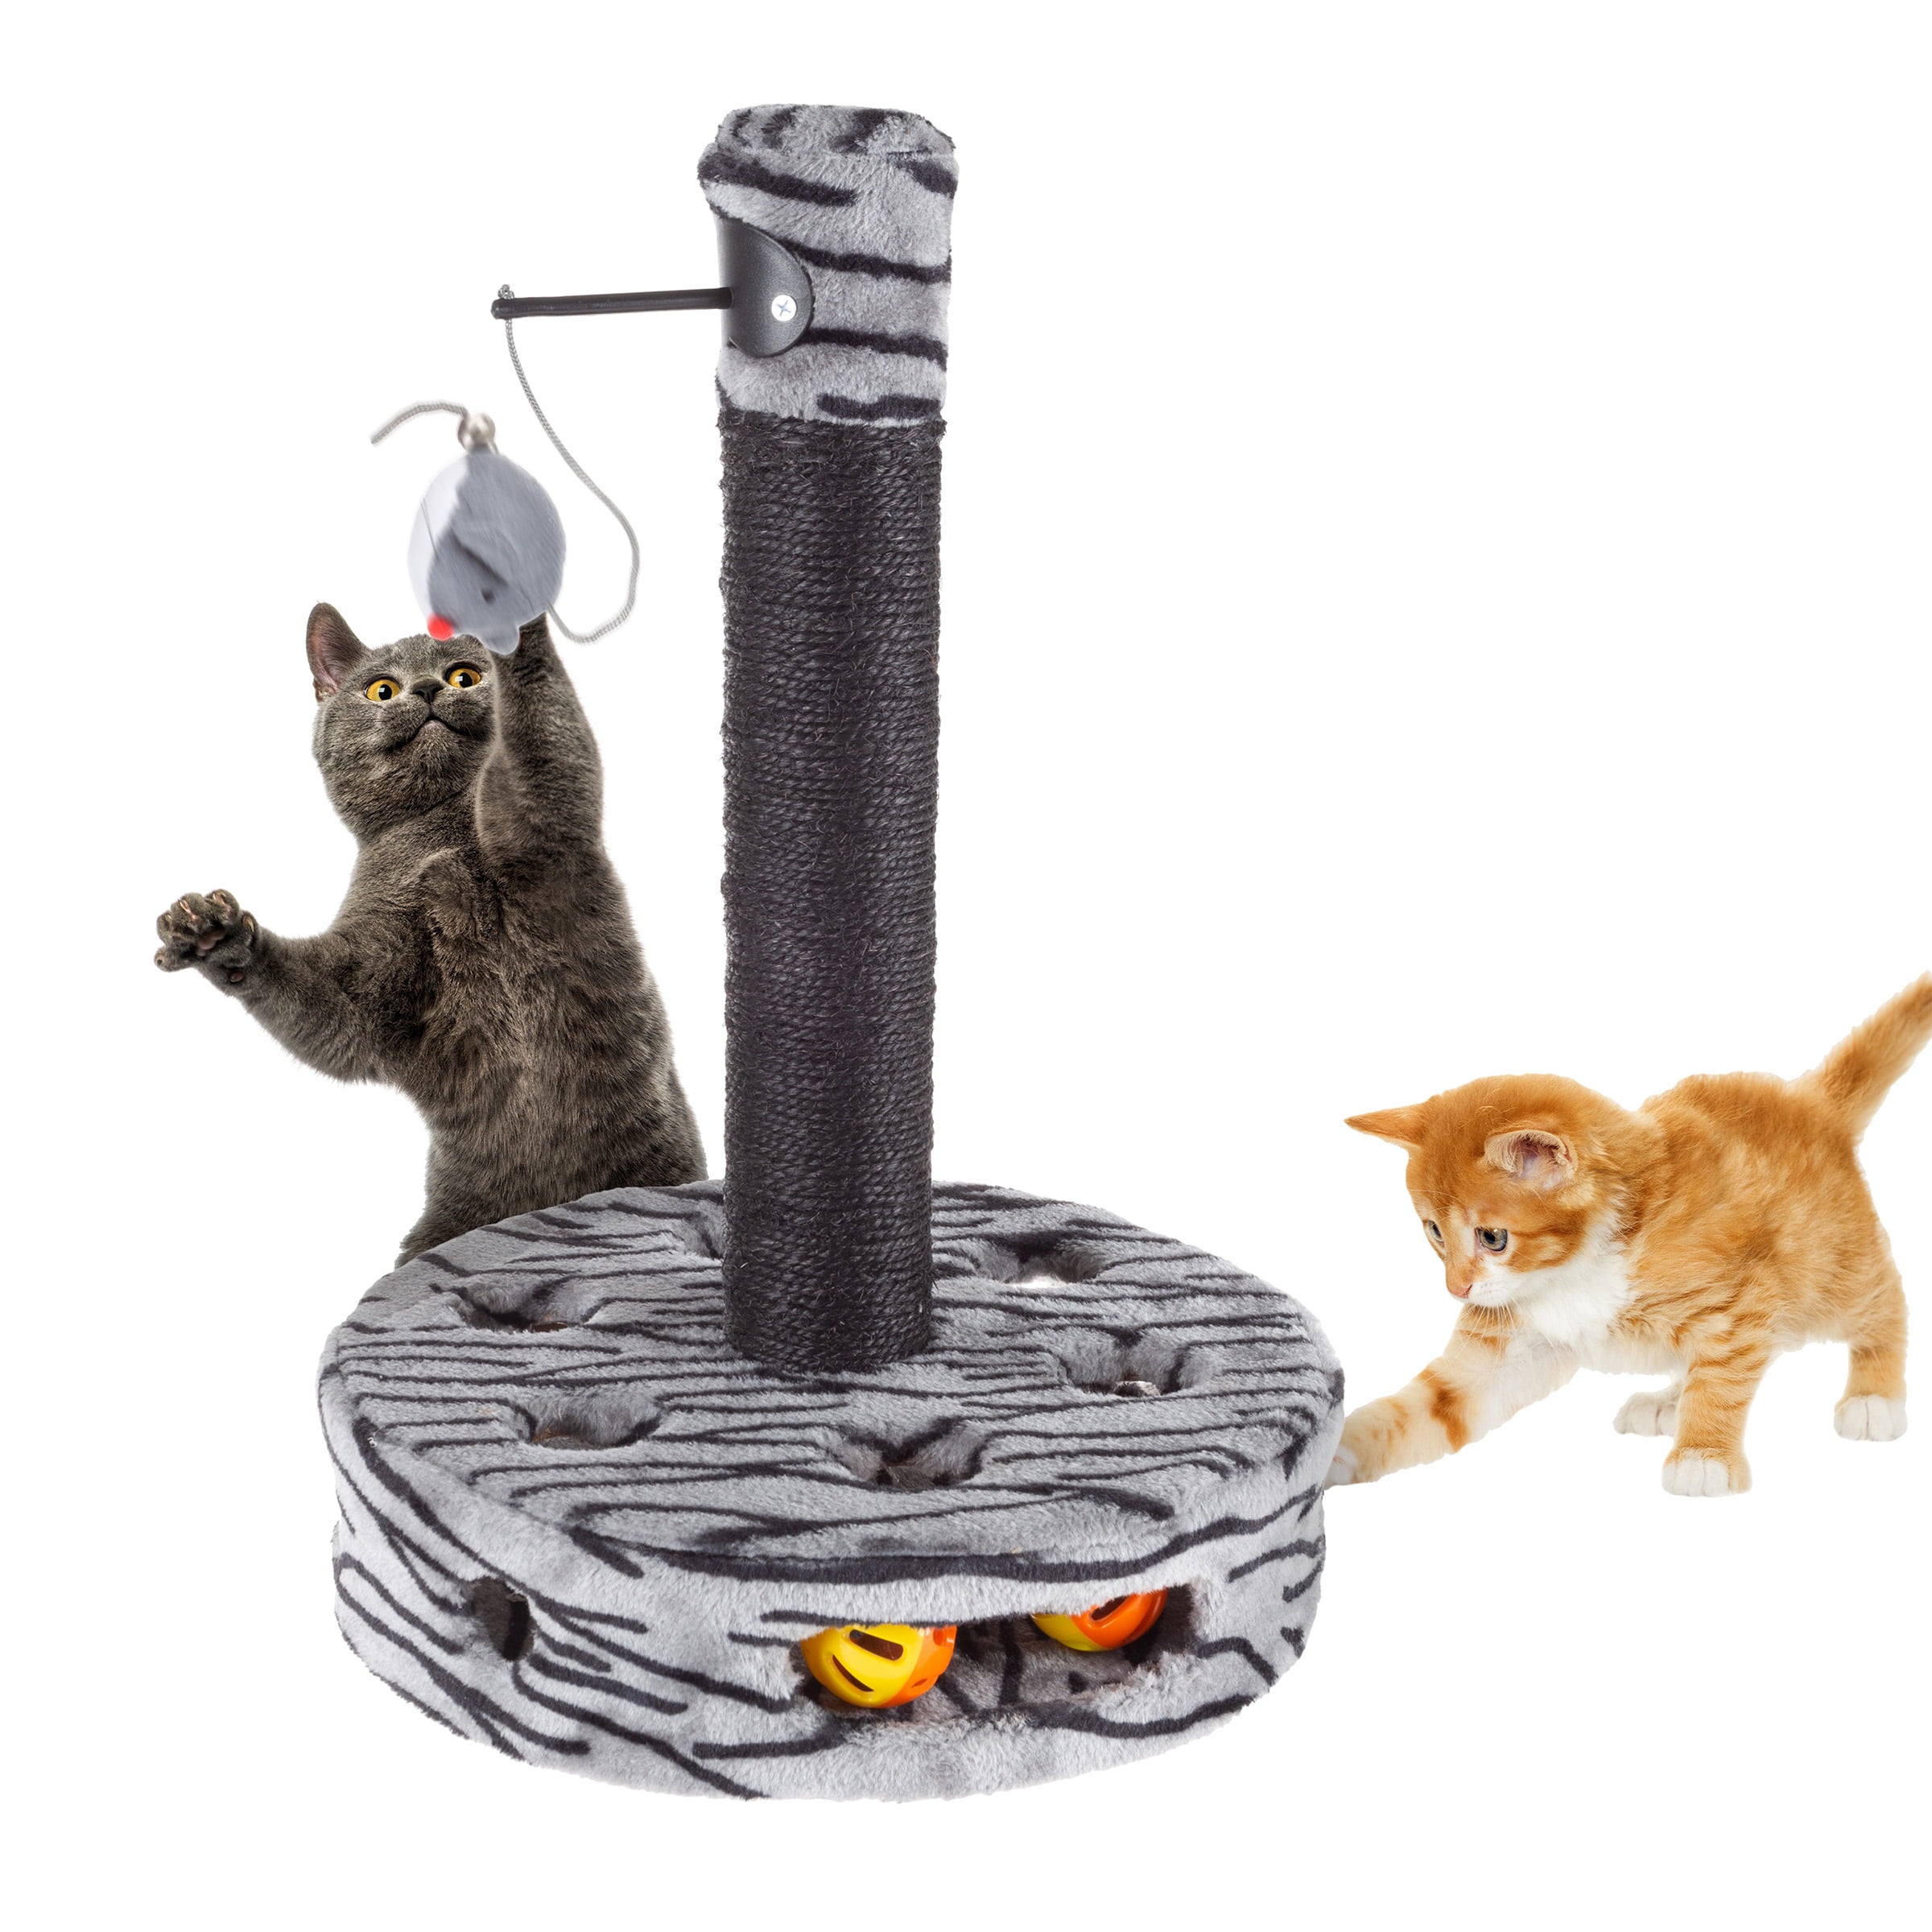 Sisal Scratch Pole & Hanging Mouse for Adult Cats & Kitten Kitty Tree PETMAKER Interactive Cat Scratching Post Built-in Rolling Ball & Track Toy 